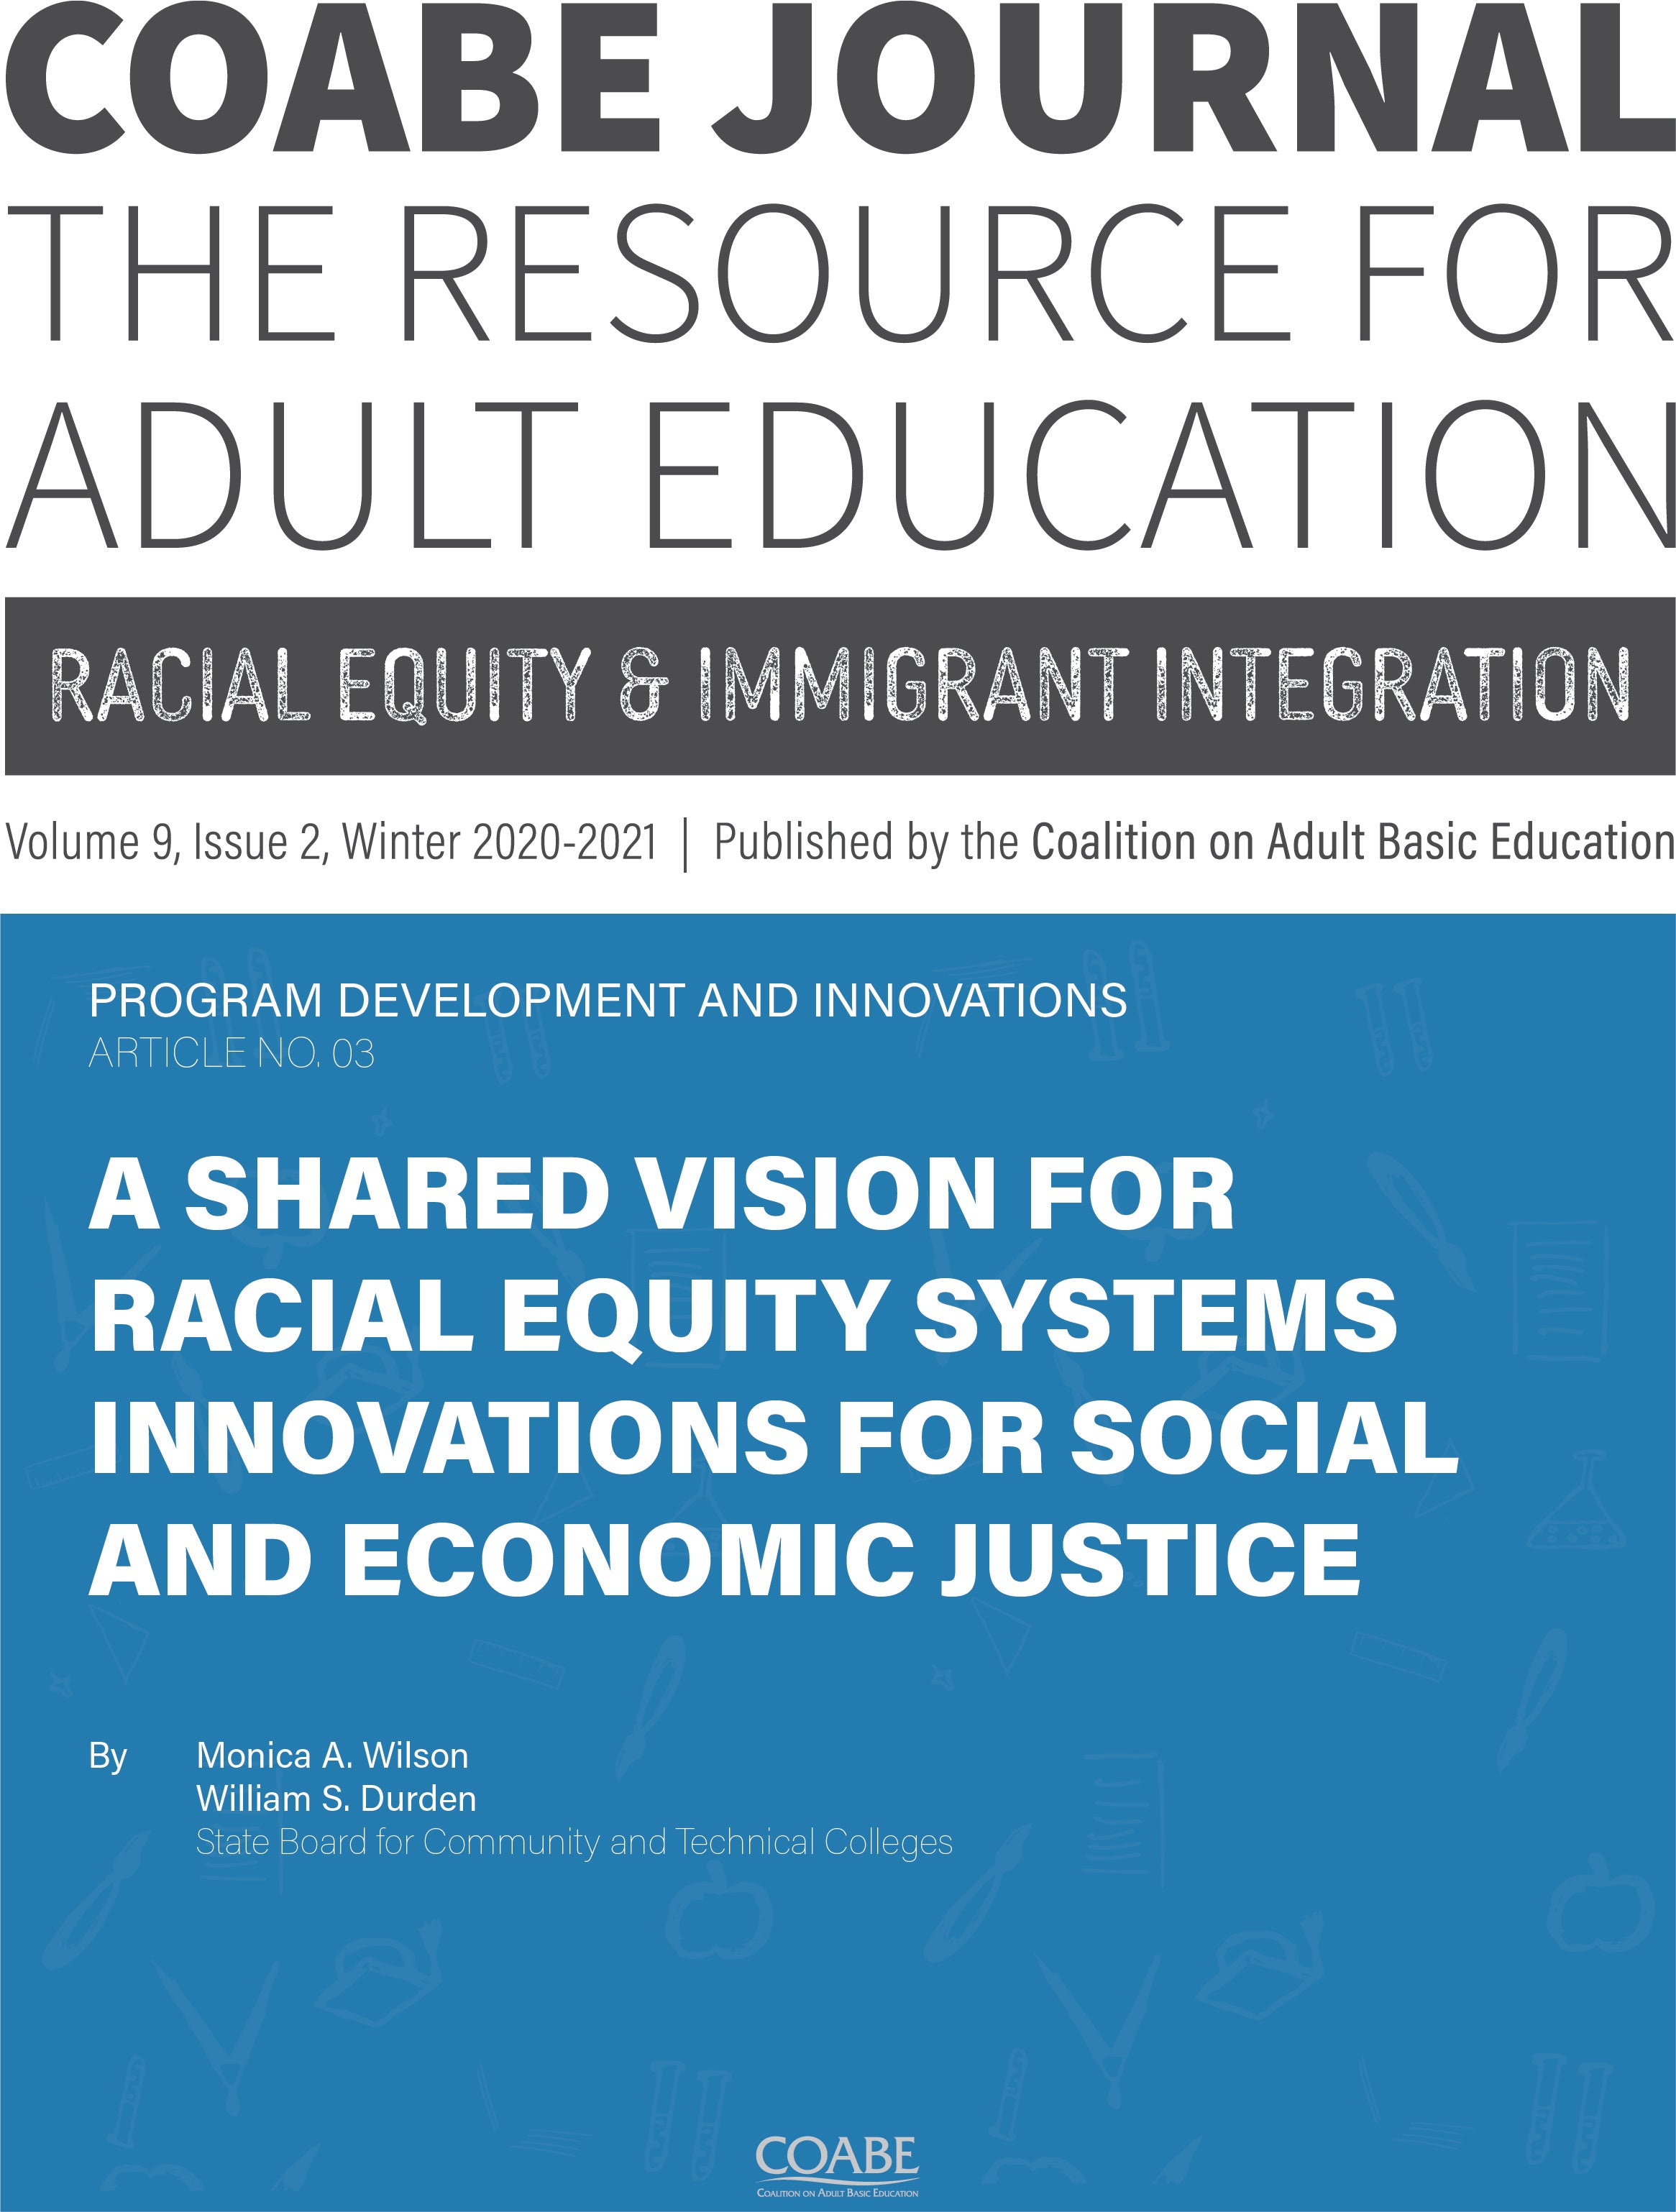 Article 03 / A Shared Vision for Racial Equity: Systems Innovations for Social and Economic Justice